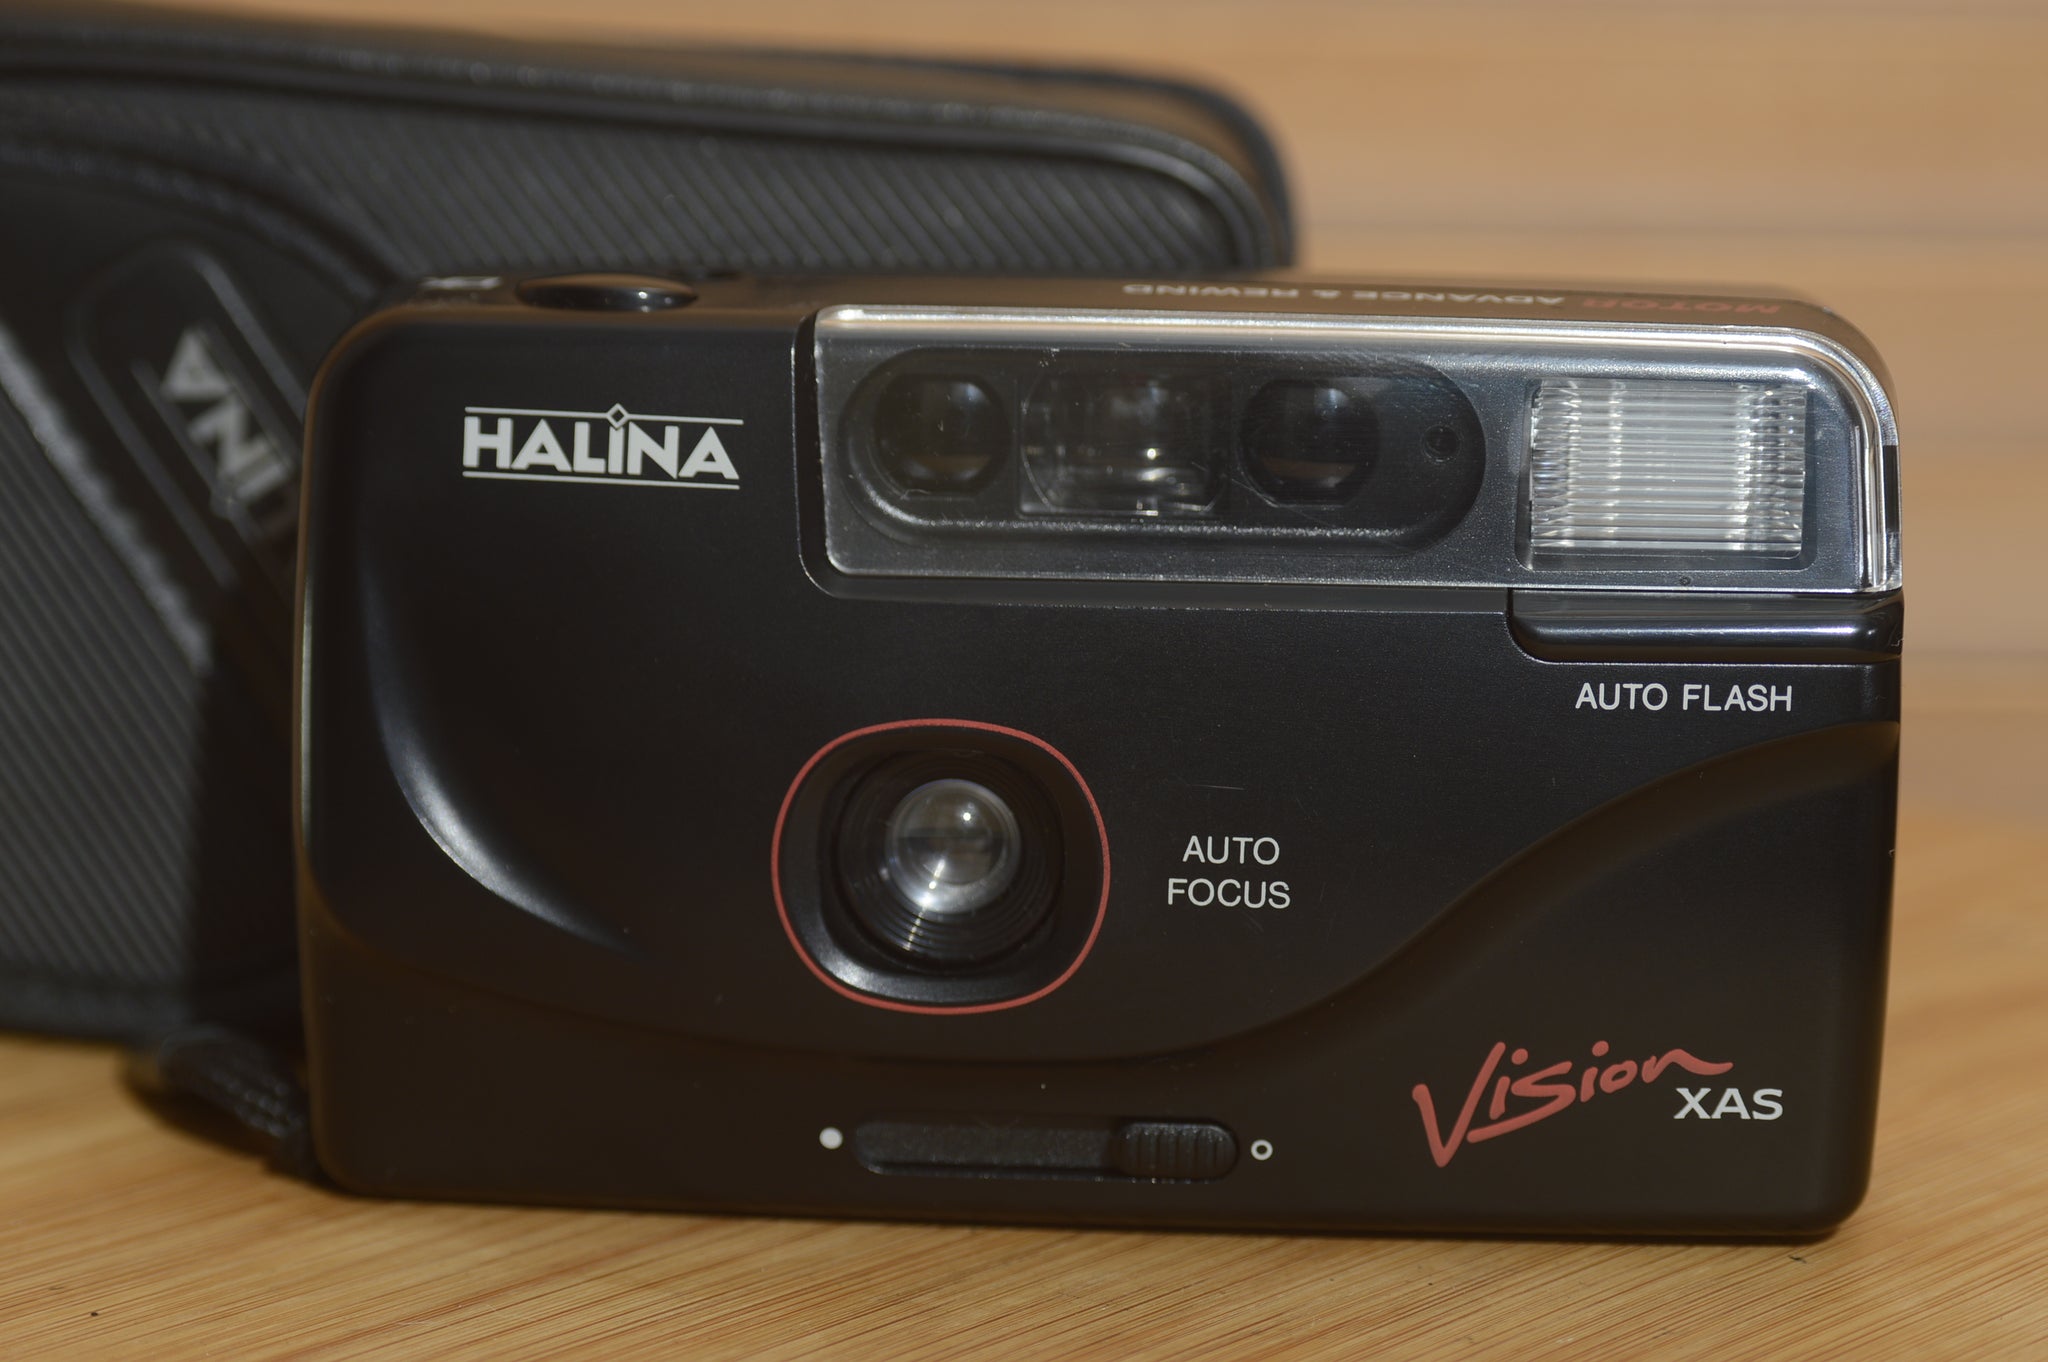 Halina Vision XAS Auto Focus 35mm point and shoot compact camera with Case. - Rewind Cameras 